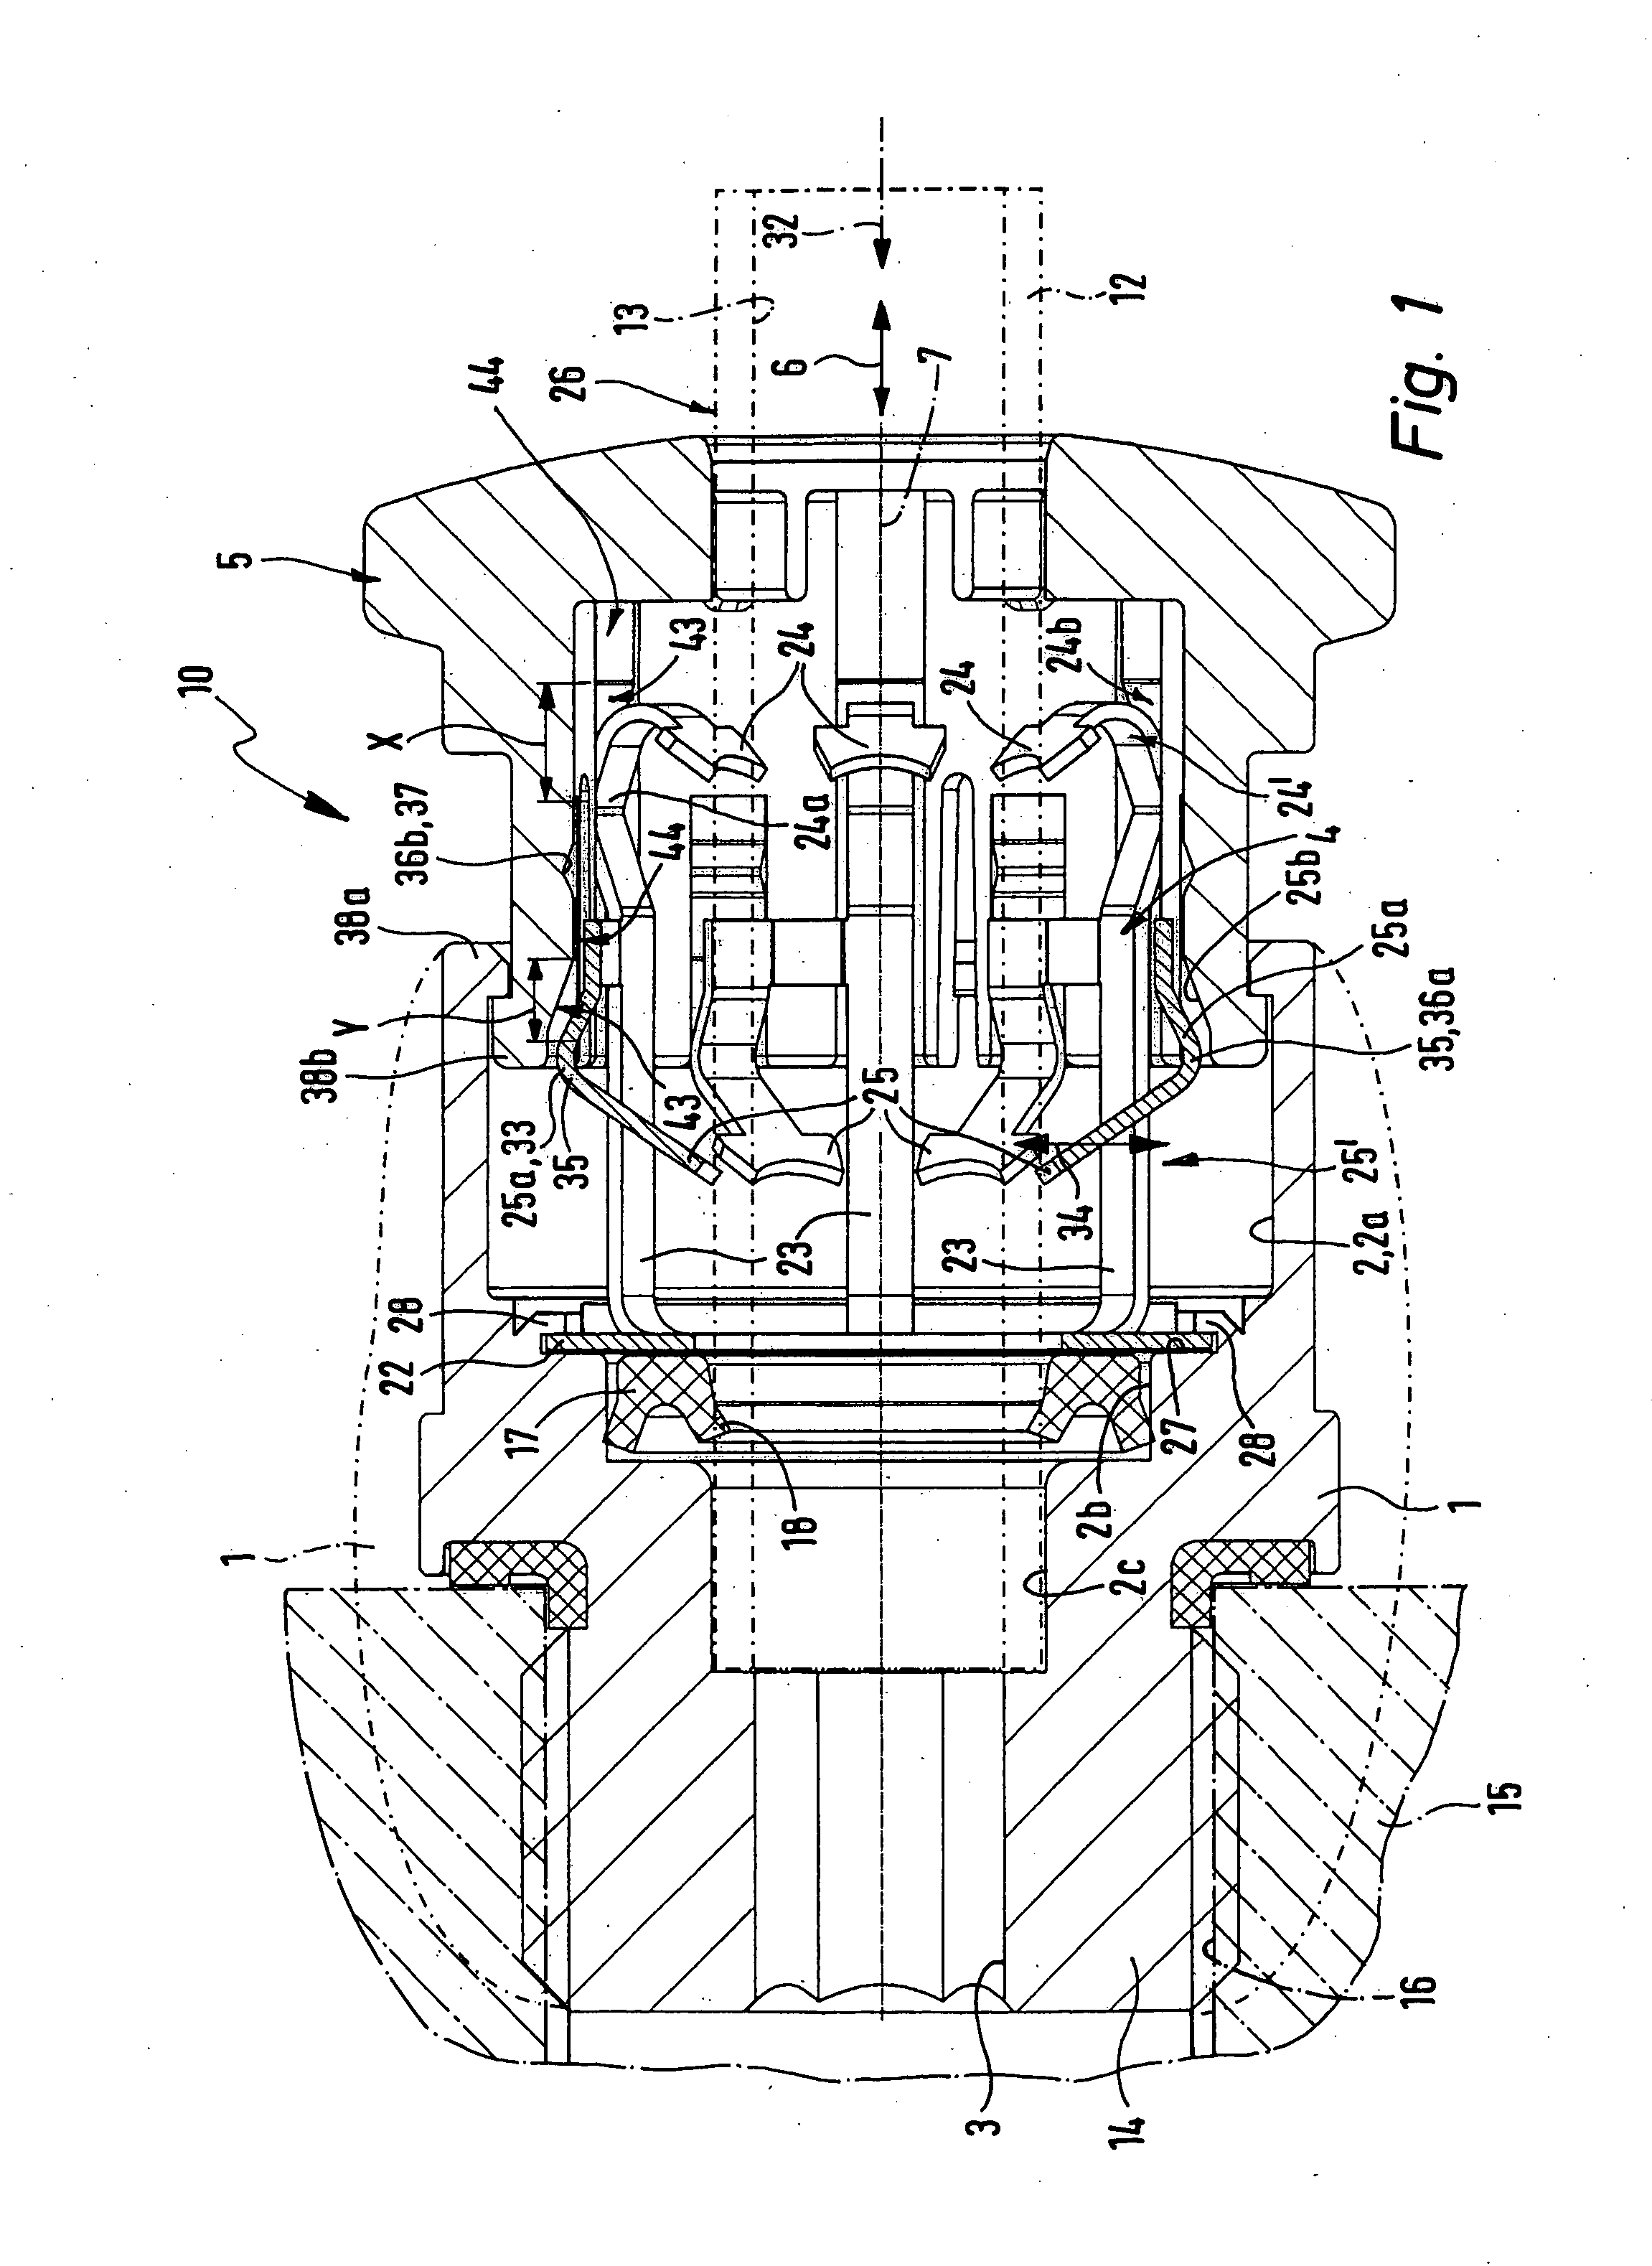 Coupling device for a fluid line